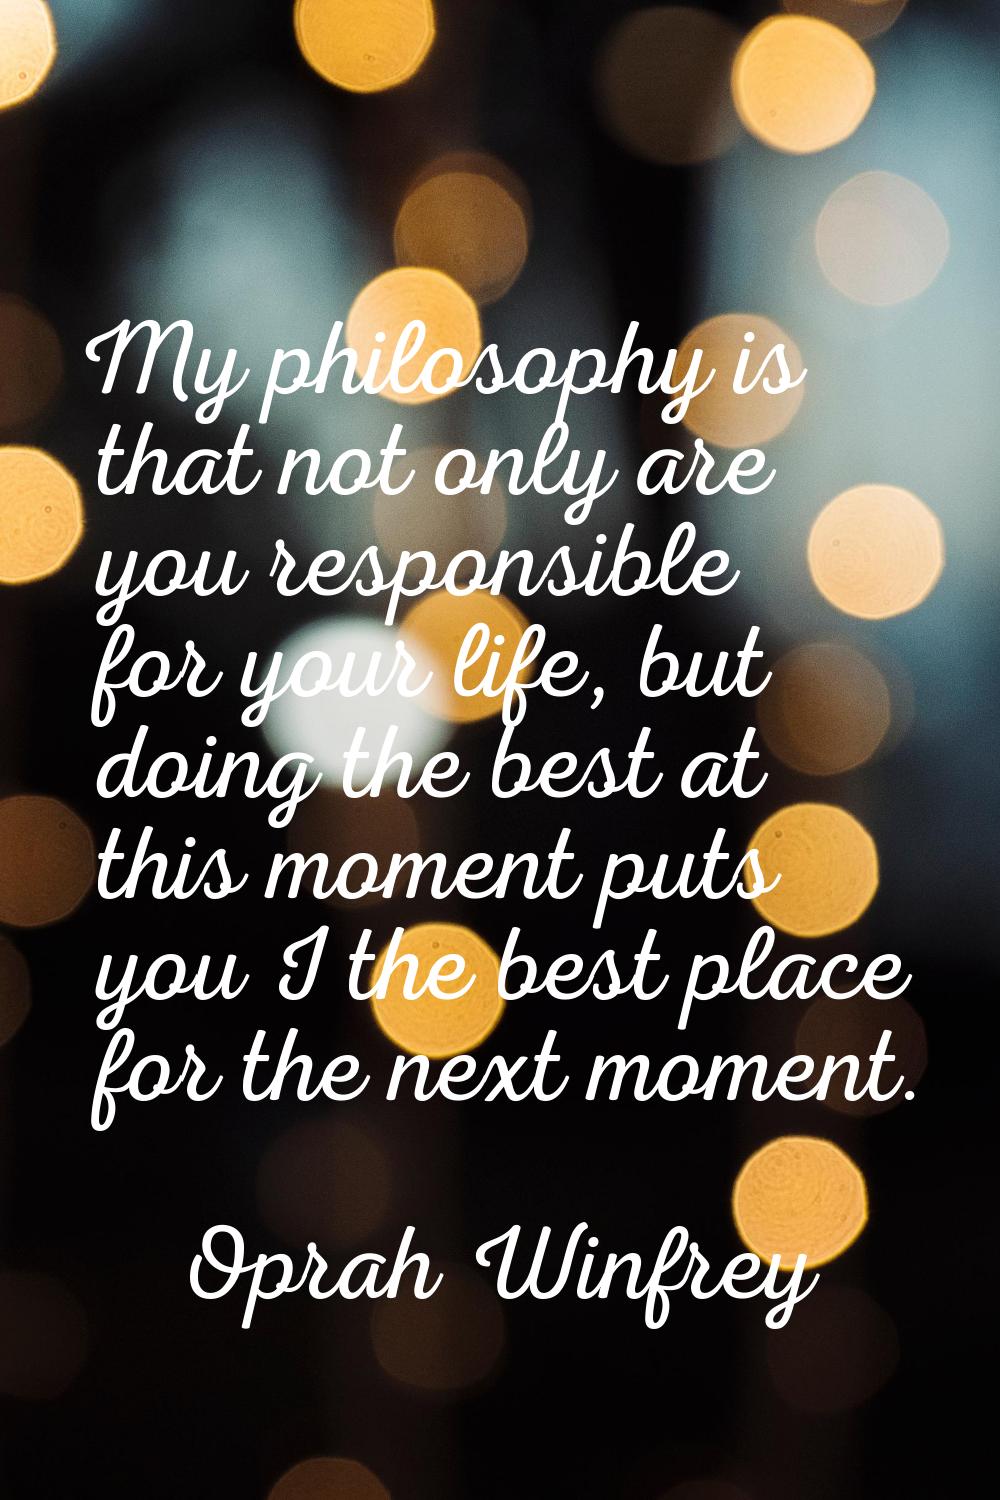 My philosophy is that not only are you responsible for your life, but doing the best at this moment